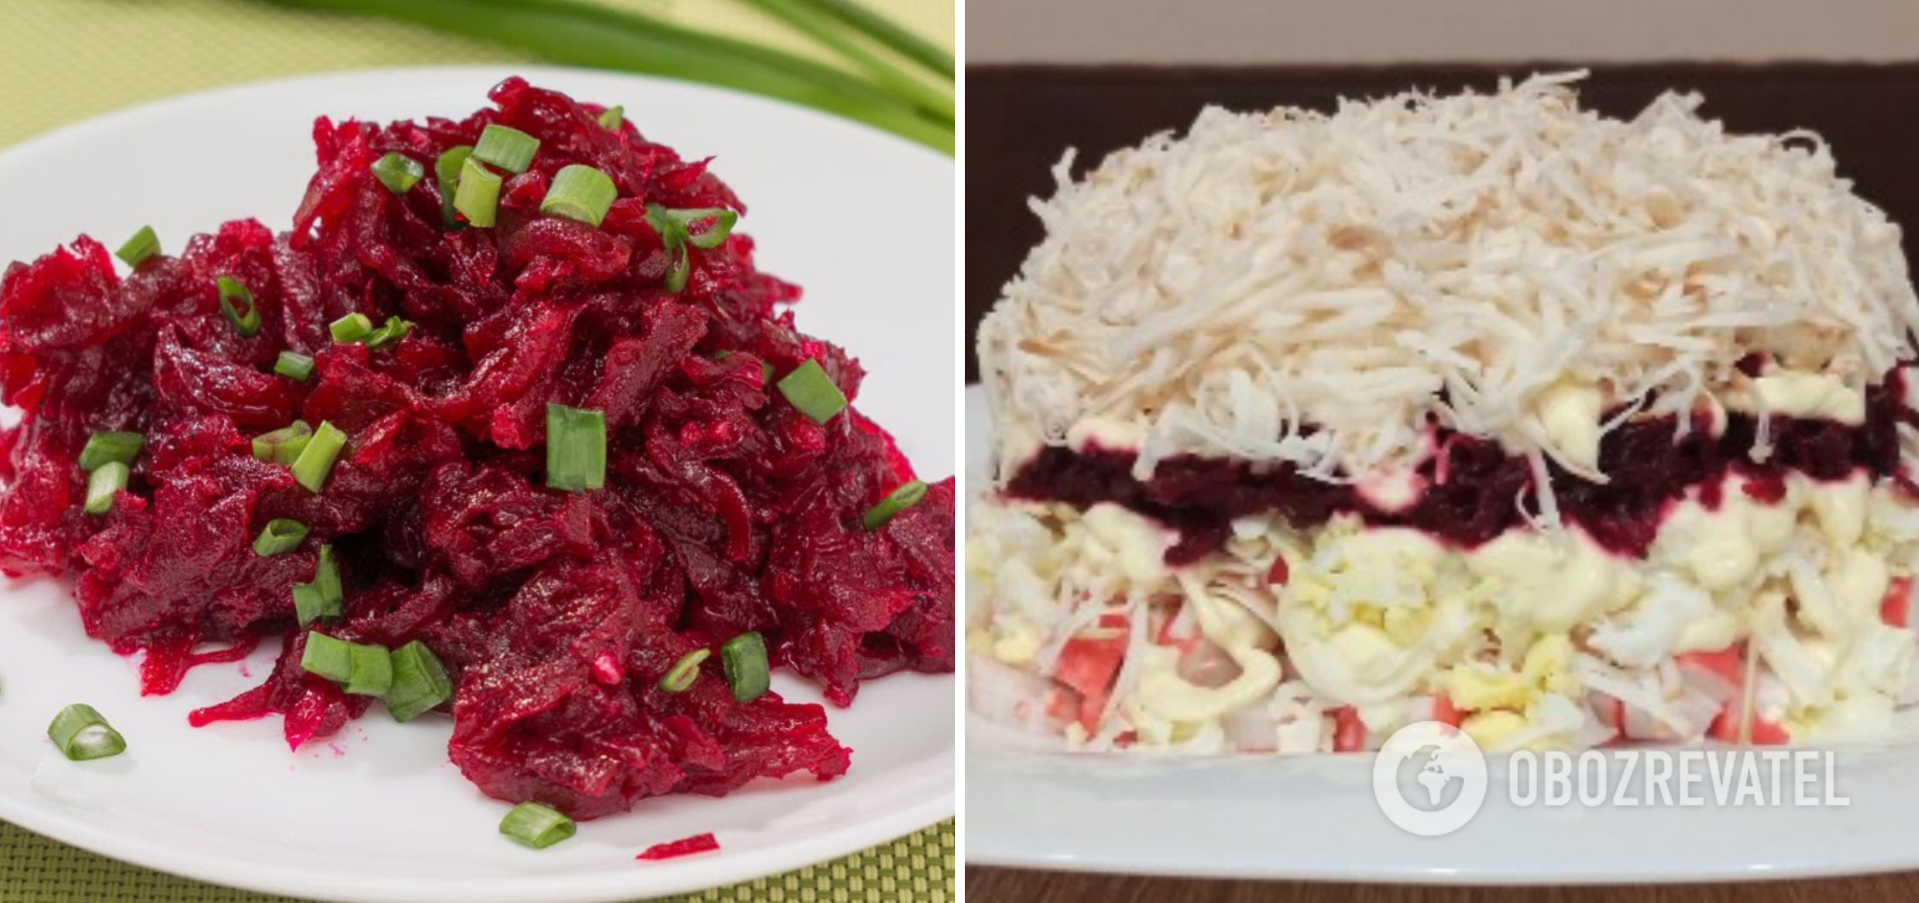 Beetroot and cheese salad